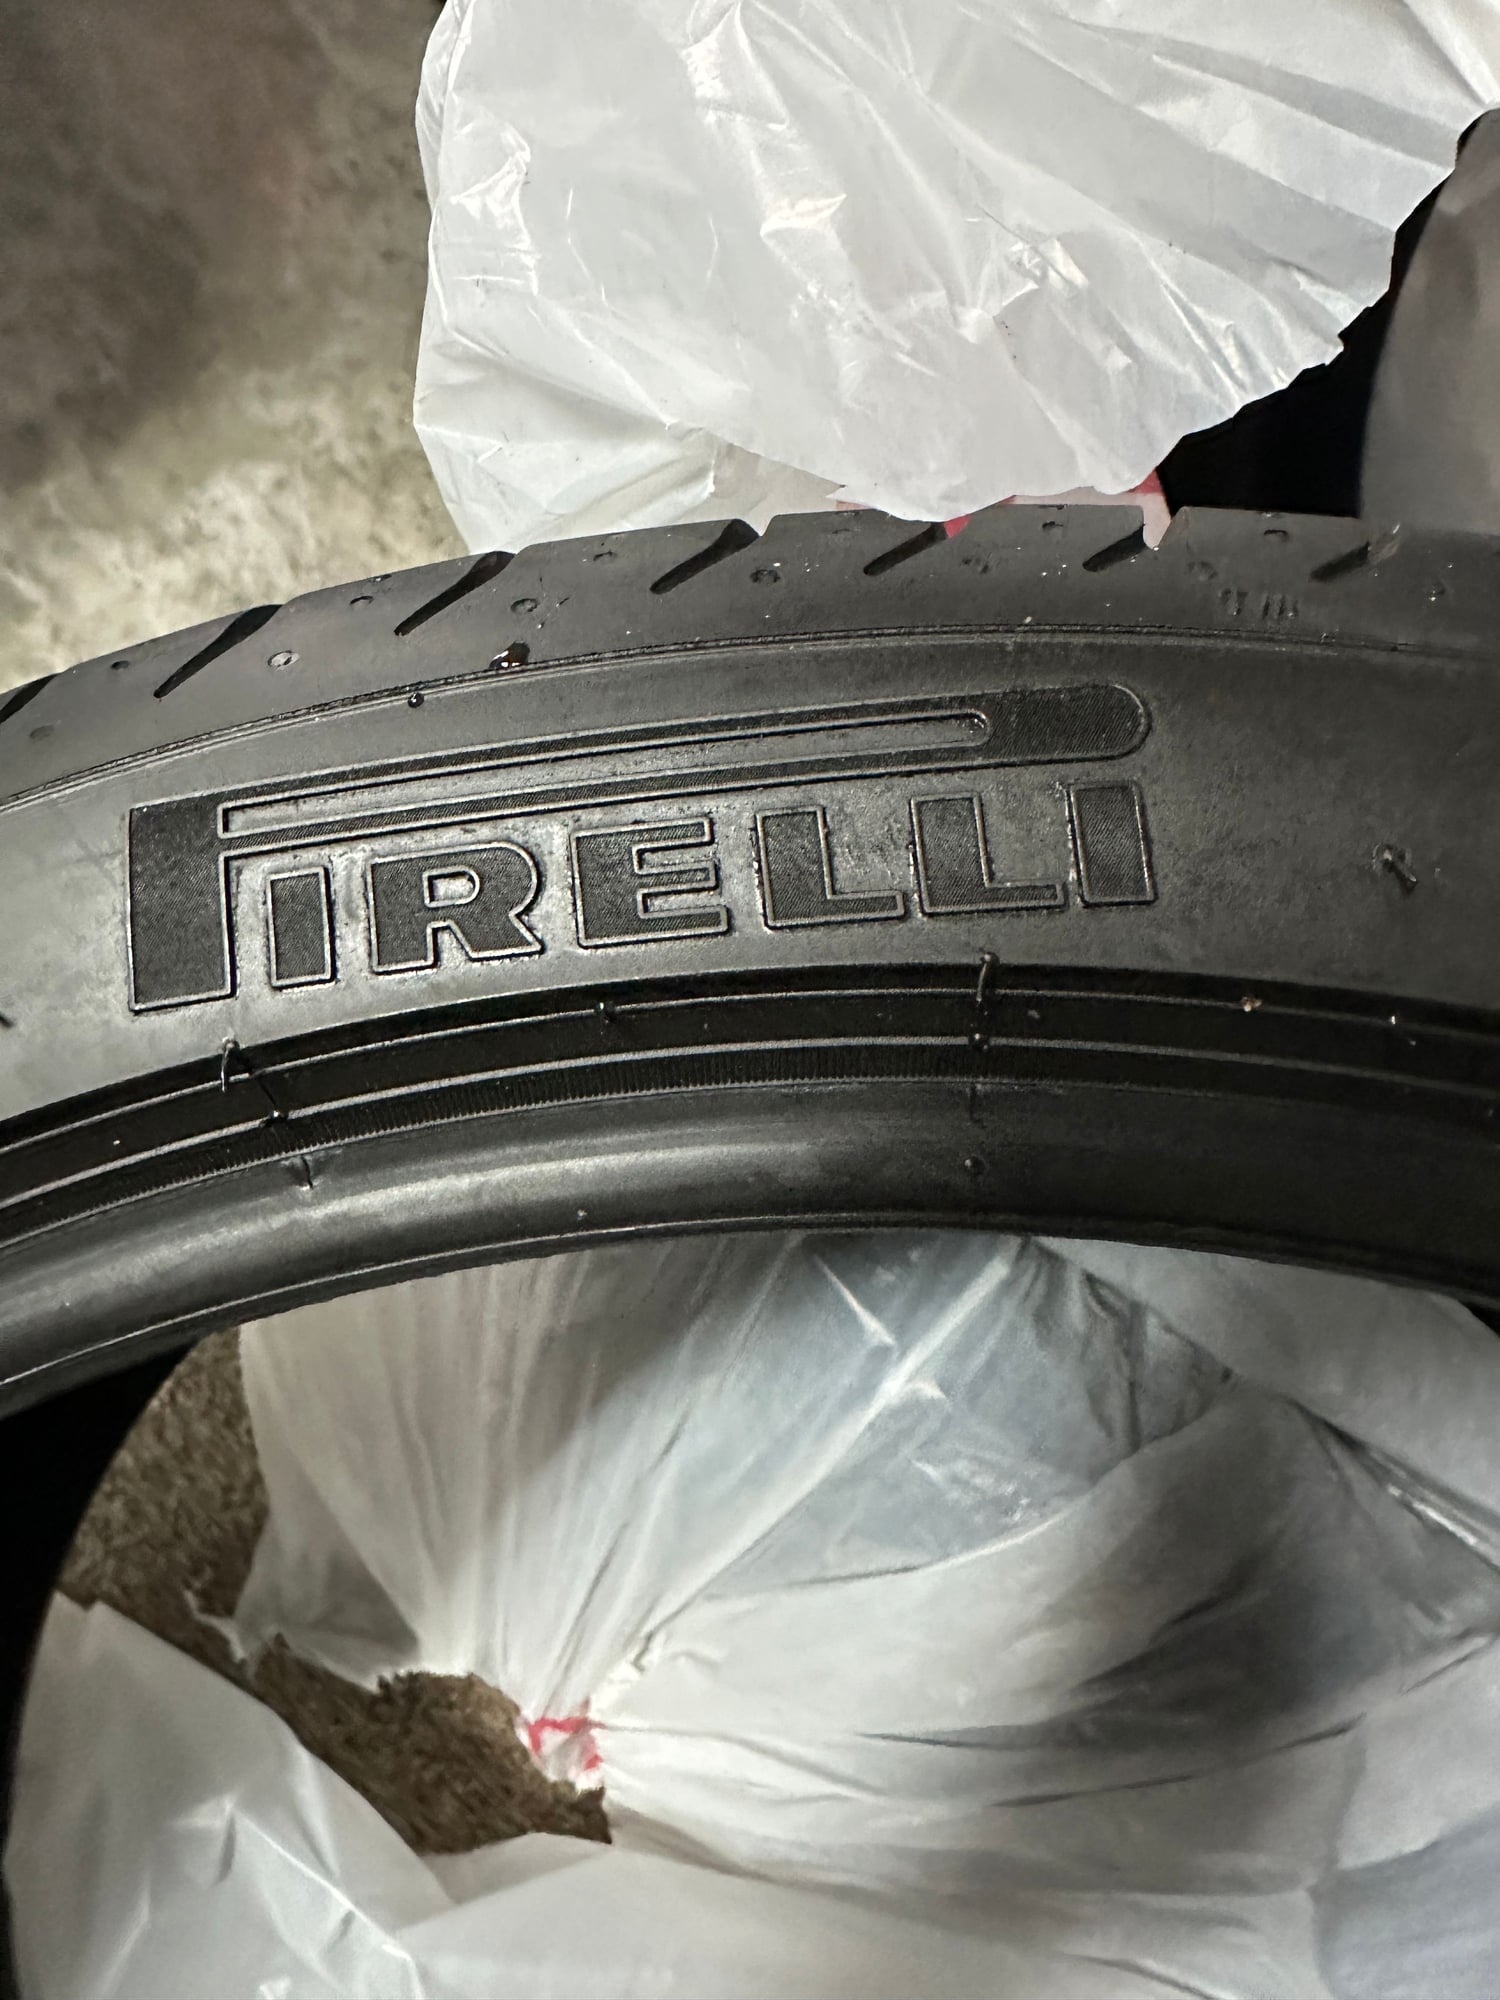 Wheels and Tires/Axles - Full Set Pirelli Tires for F-Type 255/35/20 & 295/30/20 - Used - All Years Jaguar F-Type - Saint Johns, FL 32259, United States